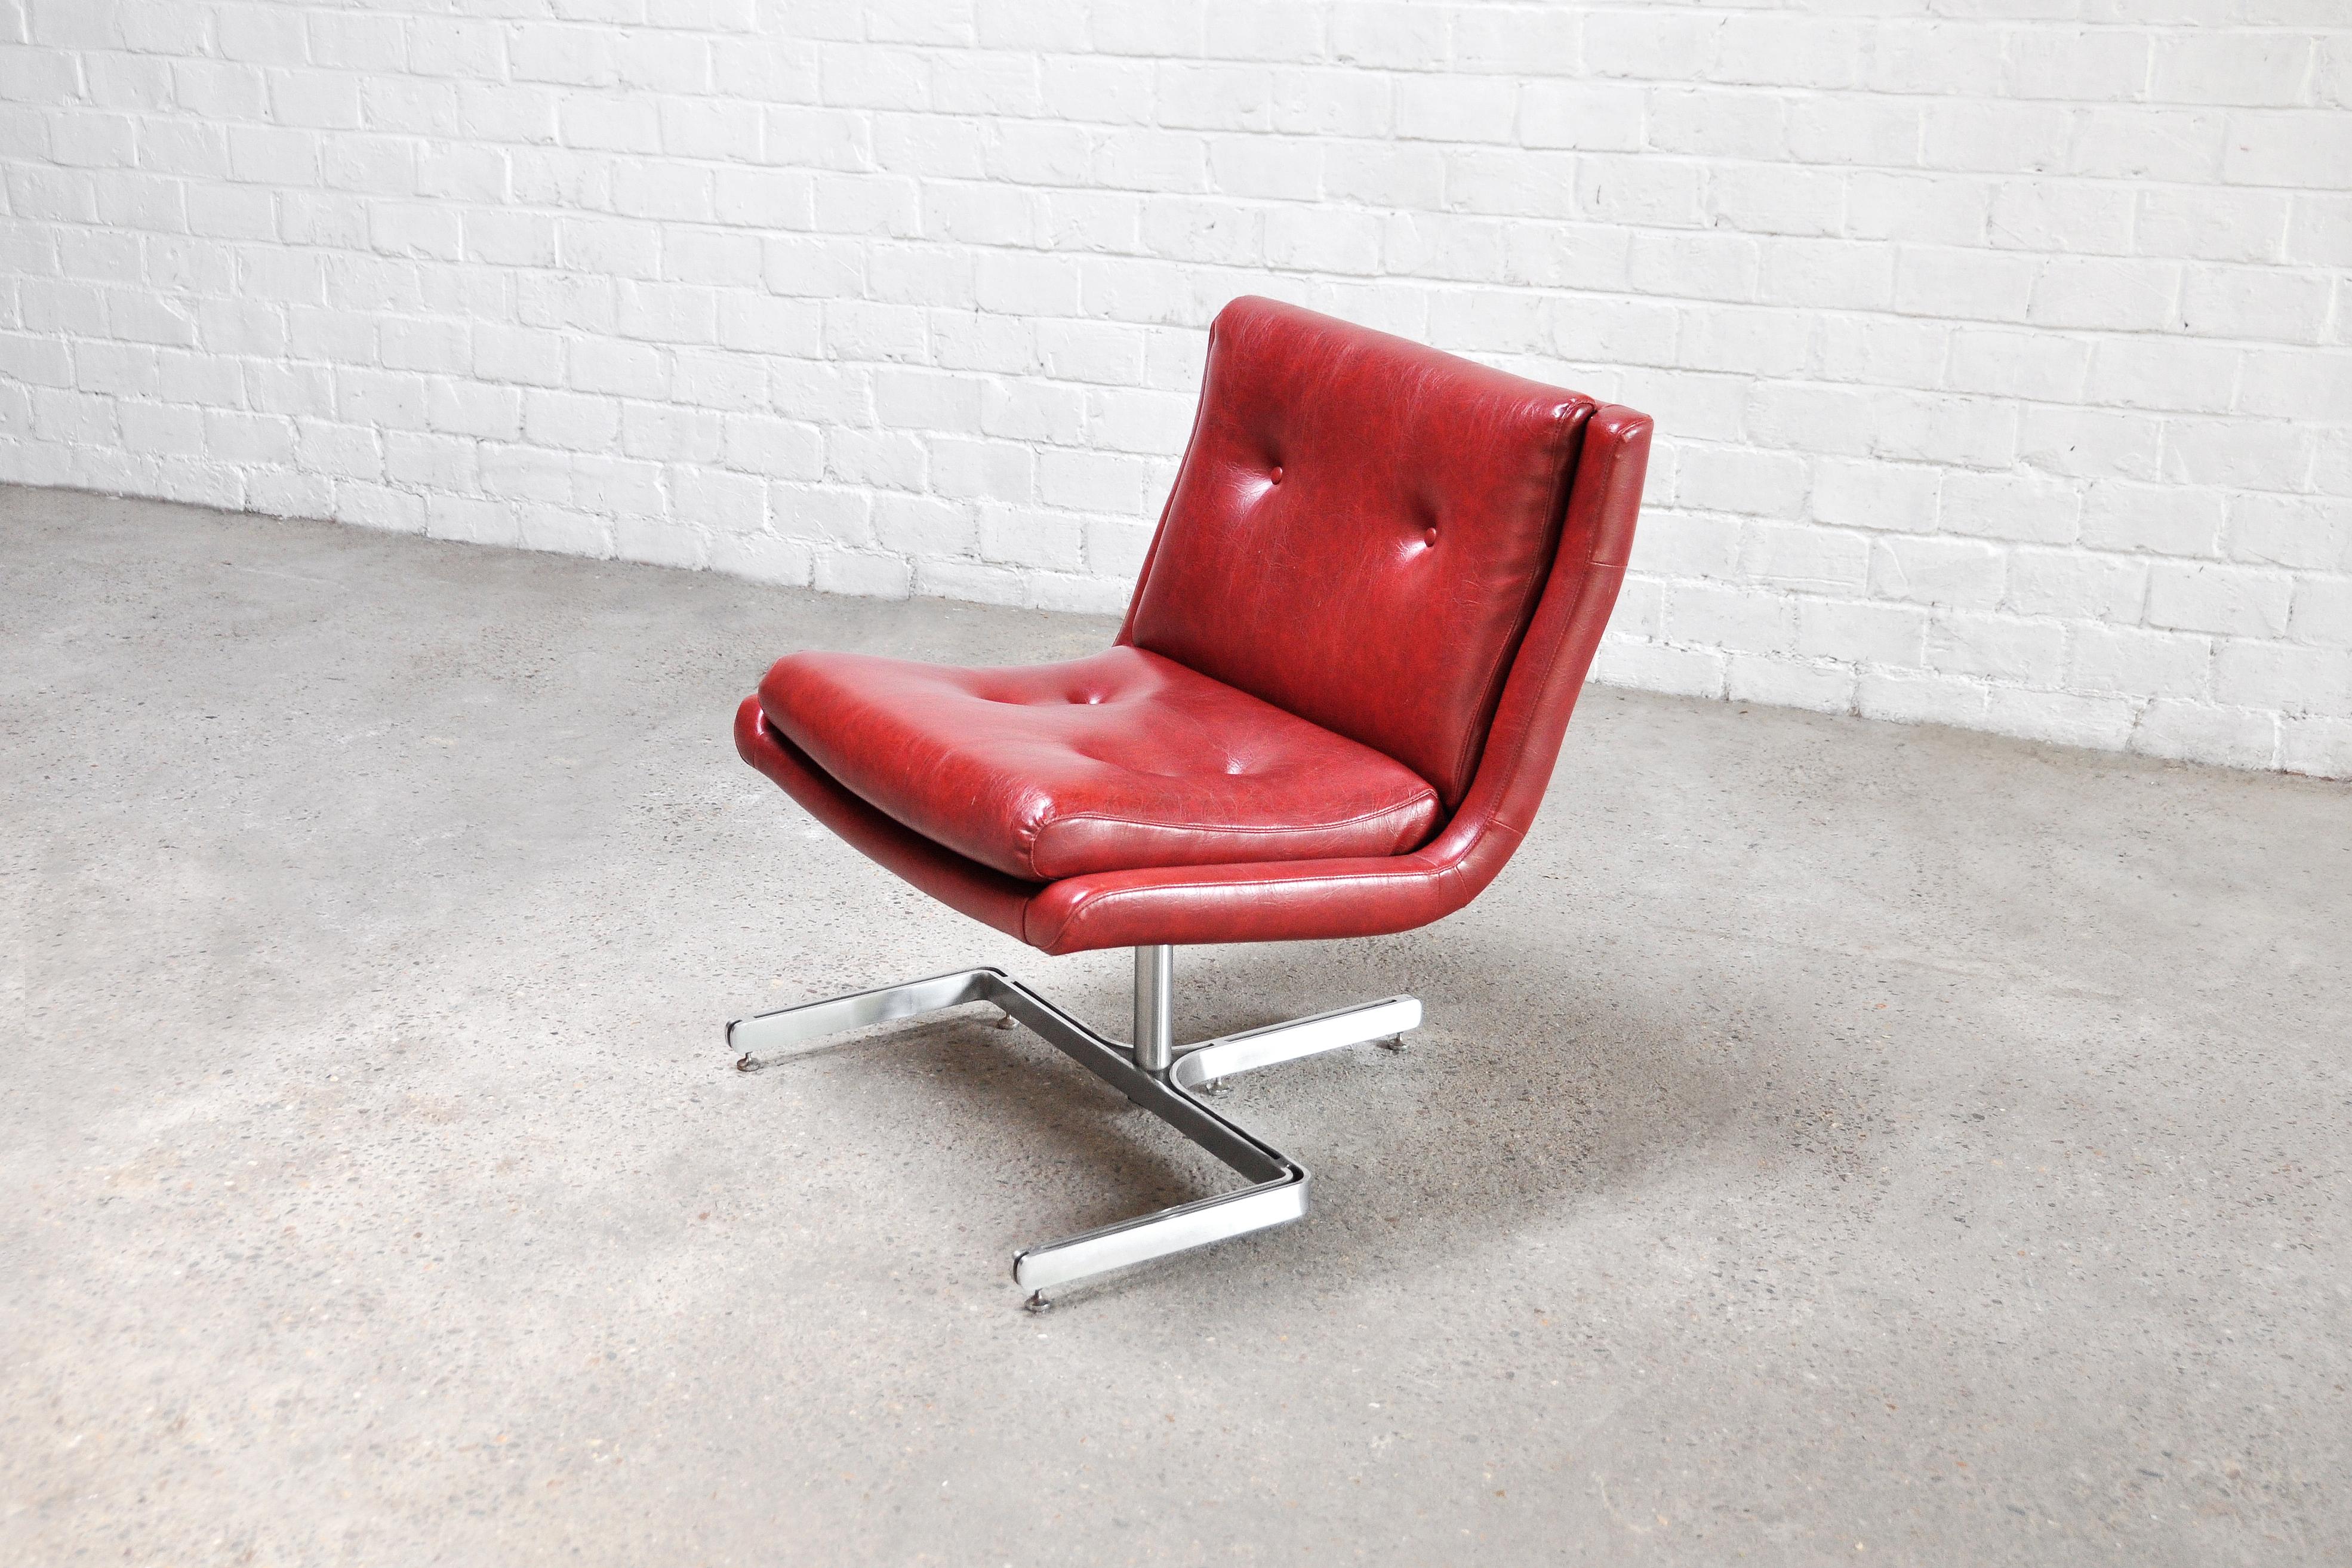 A beautiful lounge chair designed by Raphael Raffel, initially made for the interior of the executive office of the P.T.T. Telecom in France in 1973. This version is upholstered in a warm red eco-leather, and features the typical sculptural